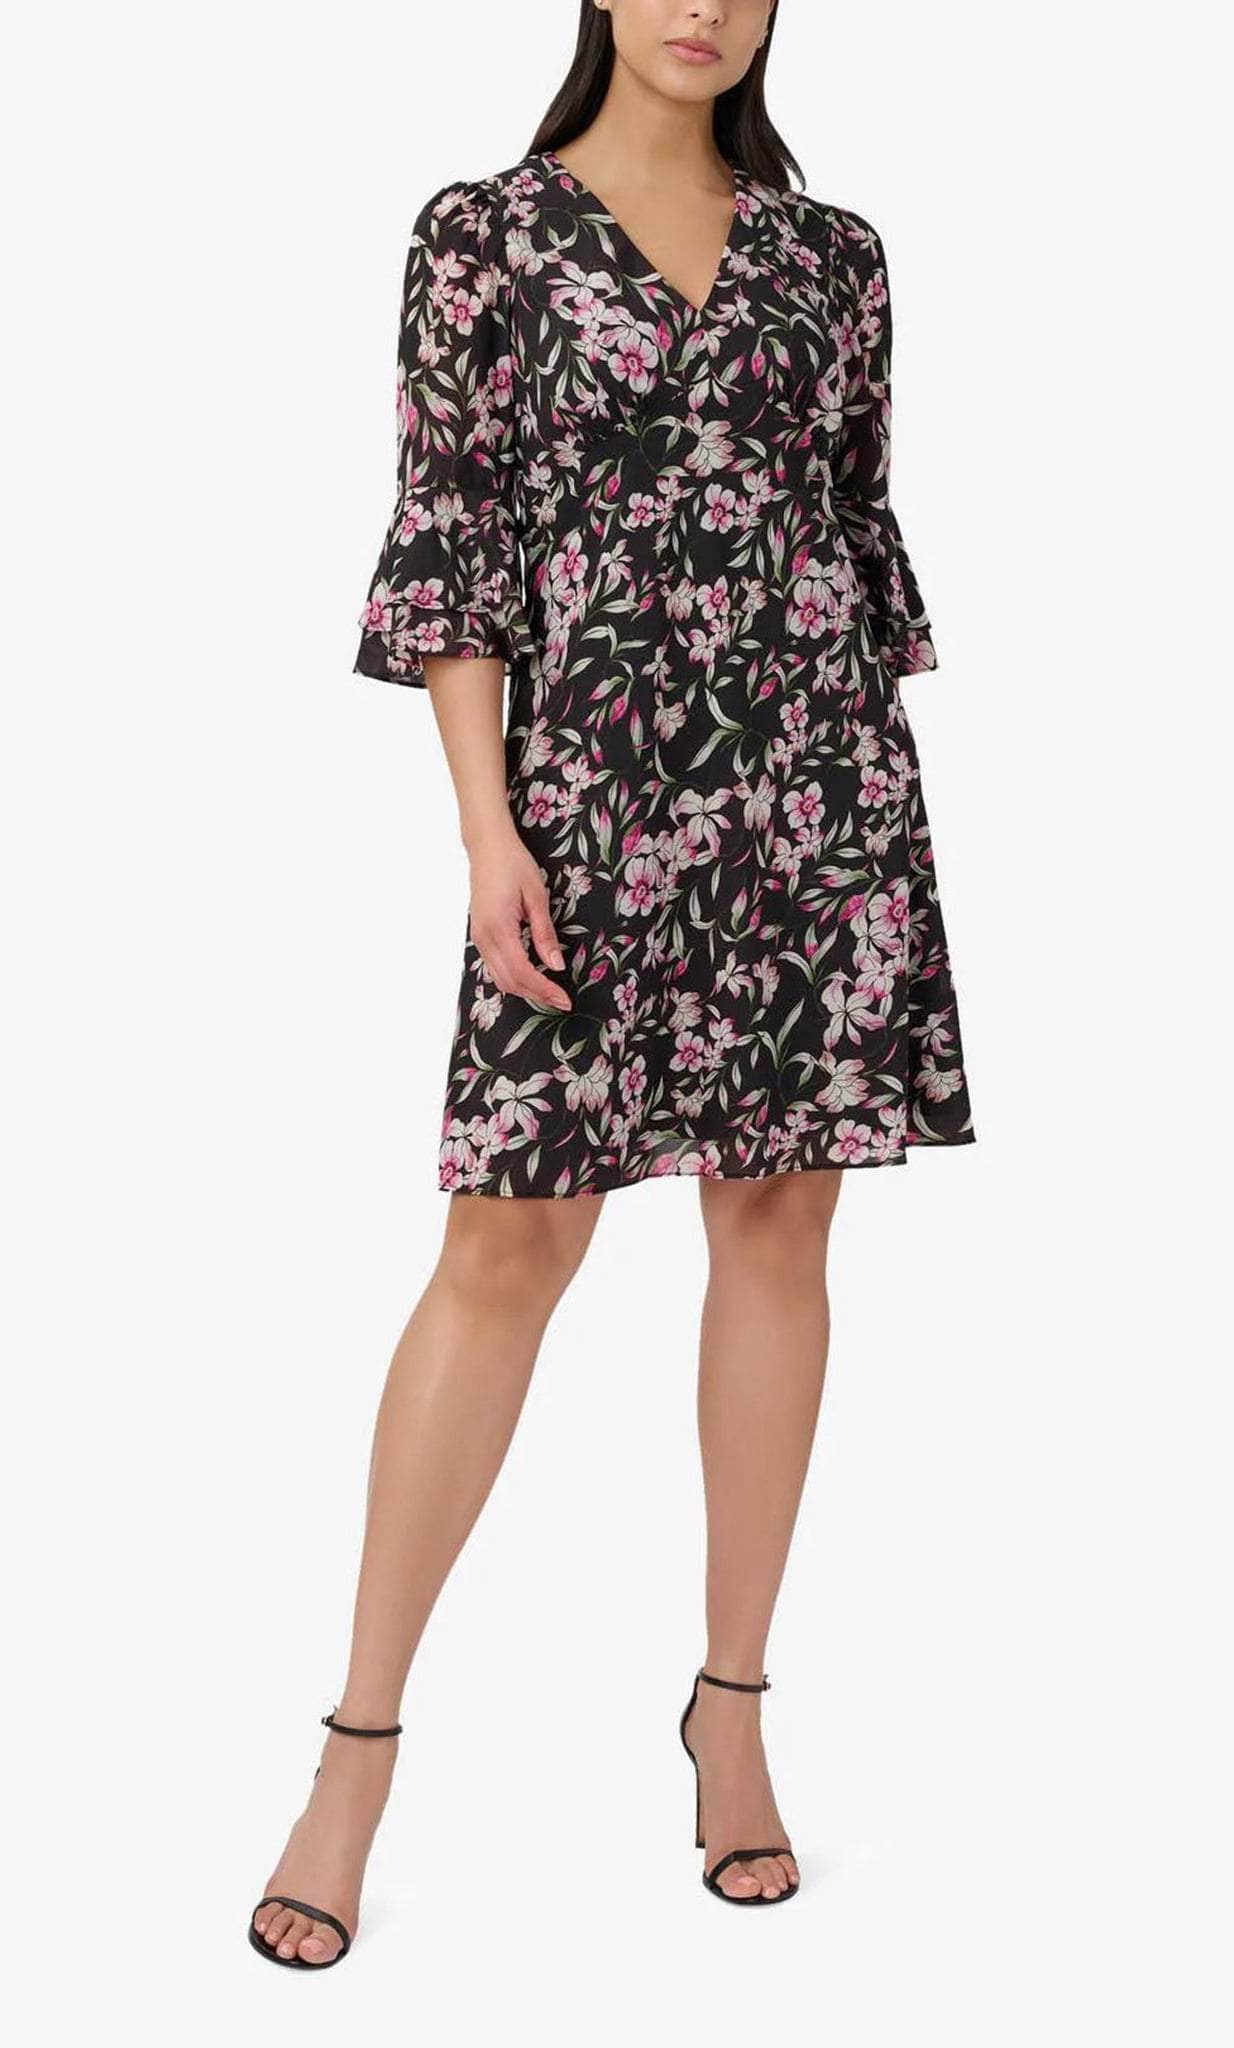 Adrianna Papell AP1D104622 - Bell Sleeve Floral Short Dress Holiday Dresses 0 / Black Multi